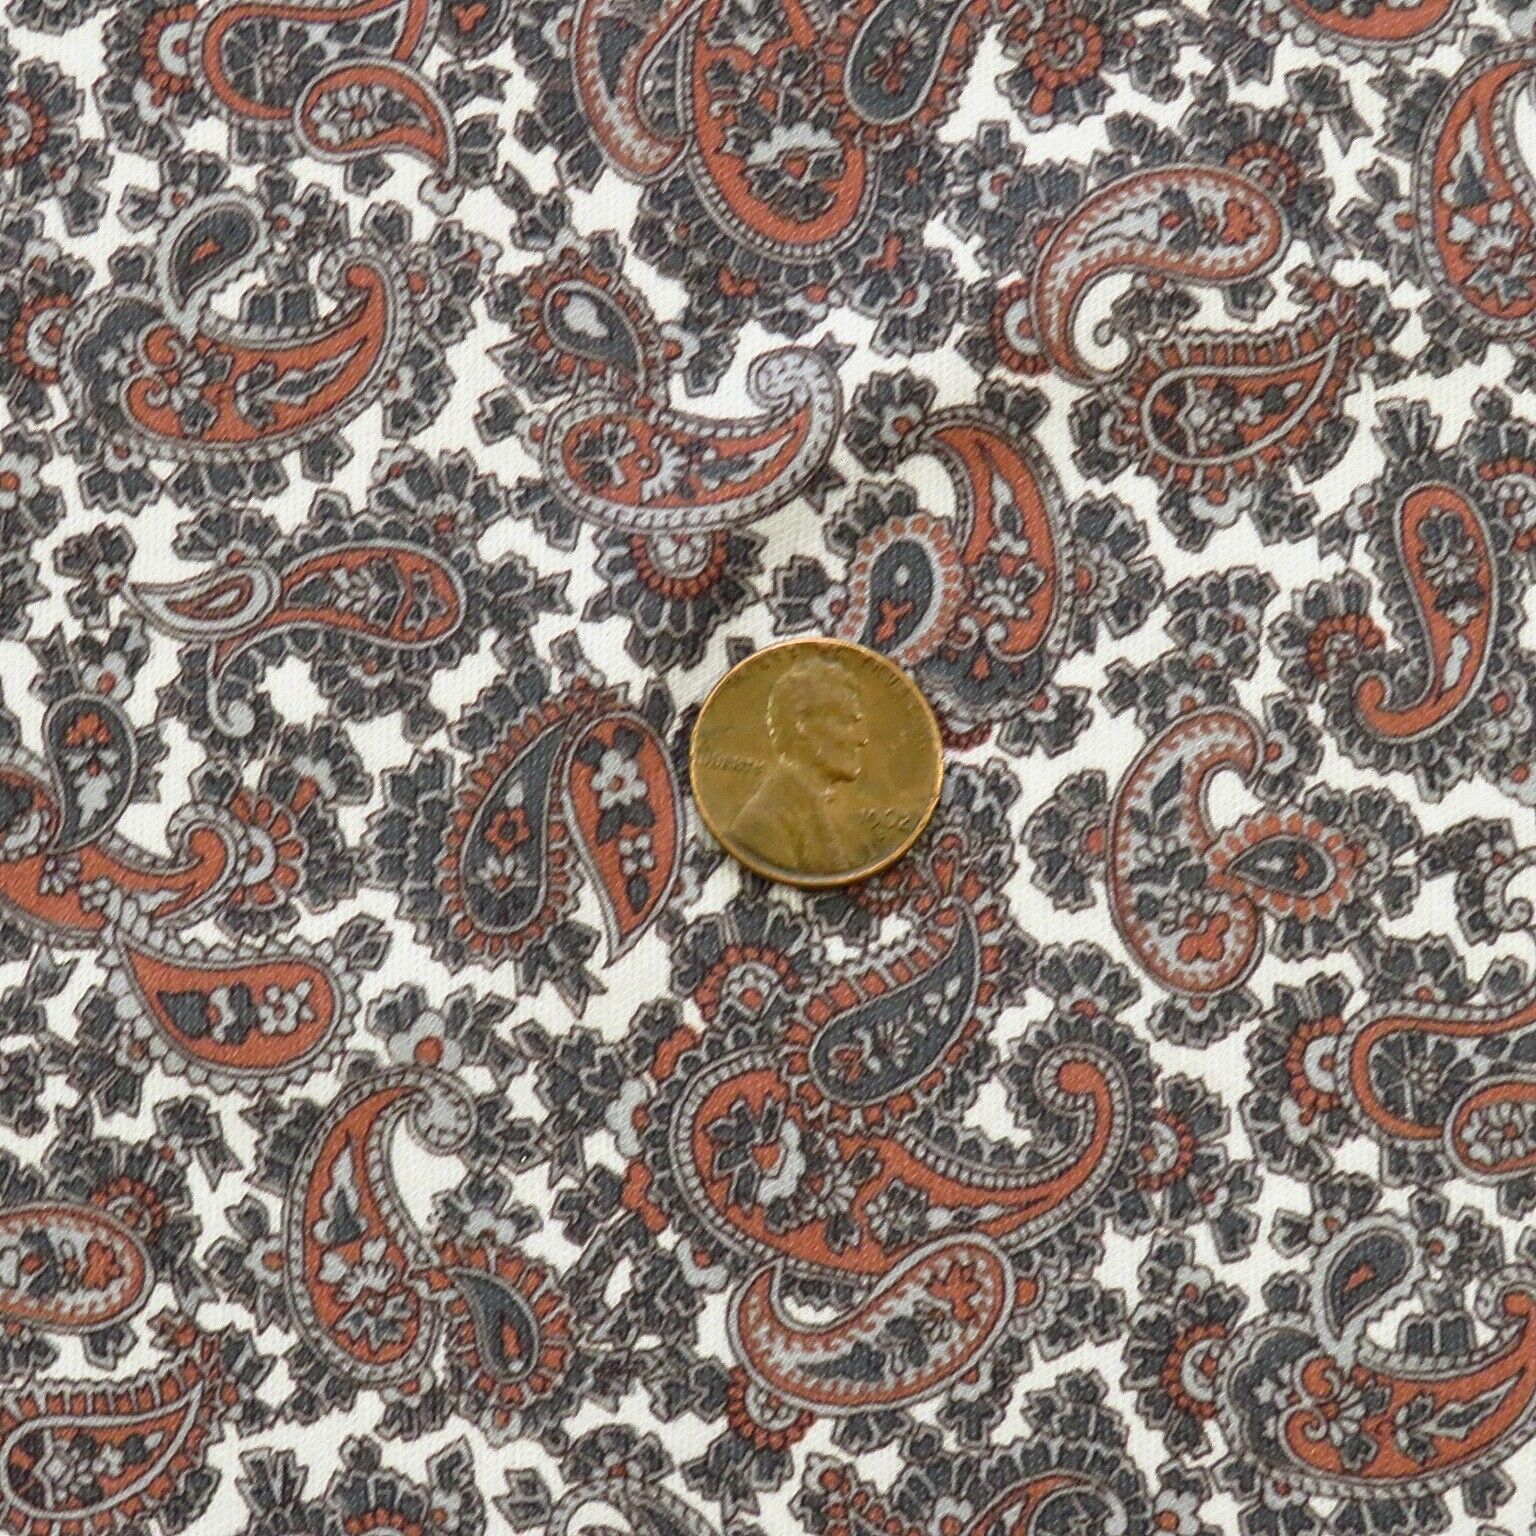 Vintage 1970s Paisley Knit Fabric 1.8YD